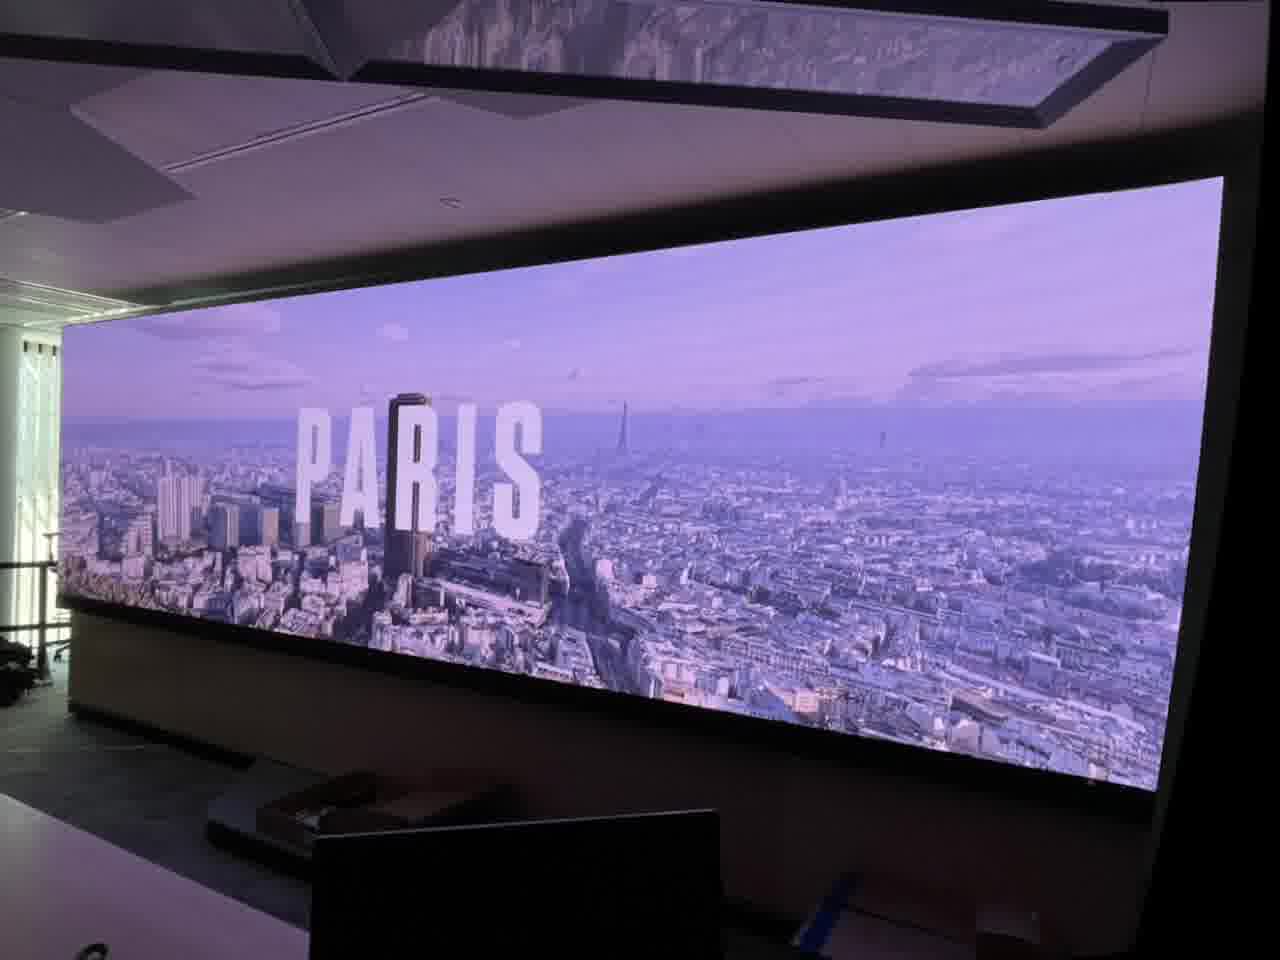 Huge QSTECH 32:9 AIO LED Replaces Telepresence in French MTR